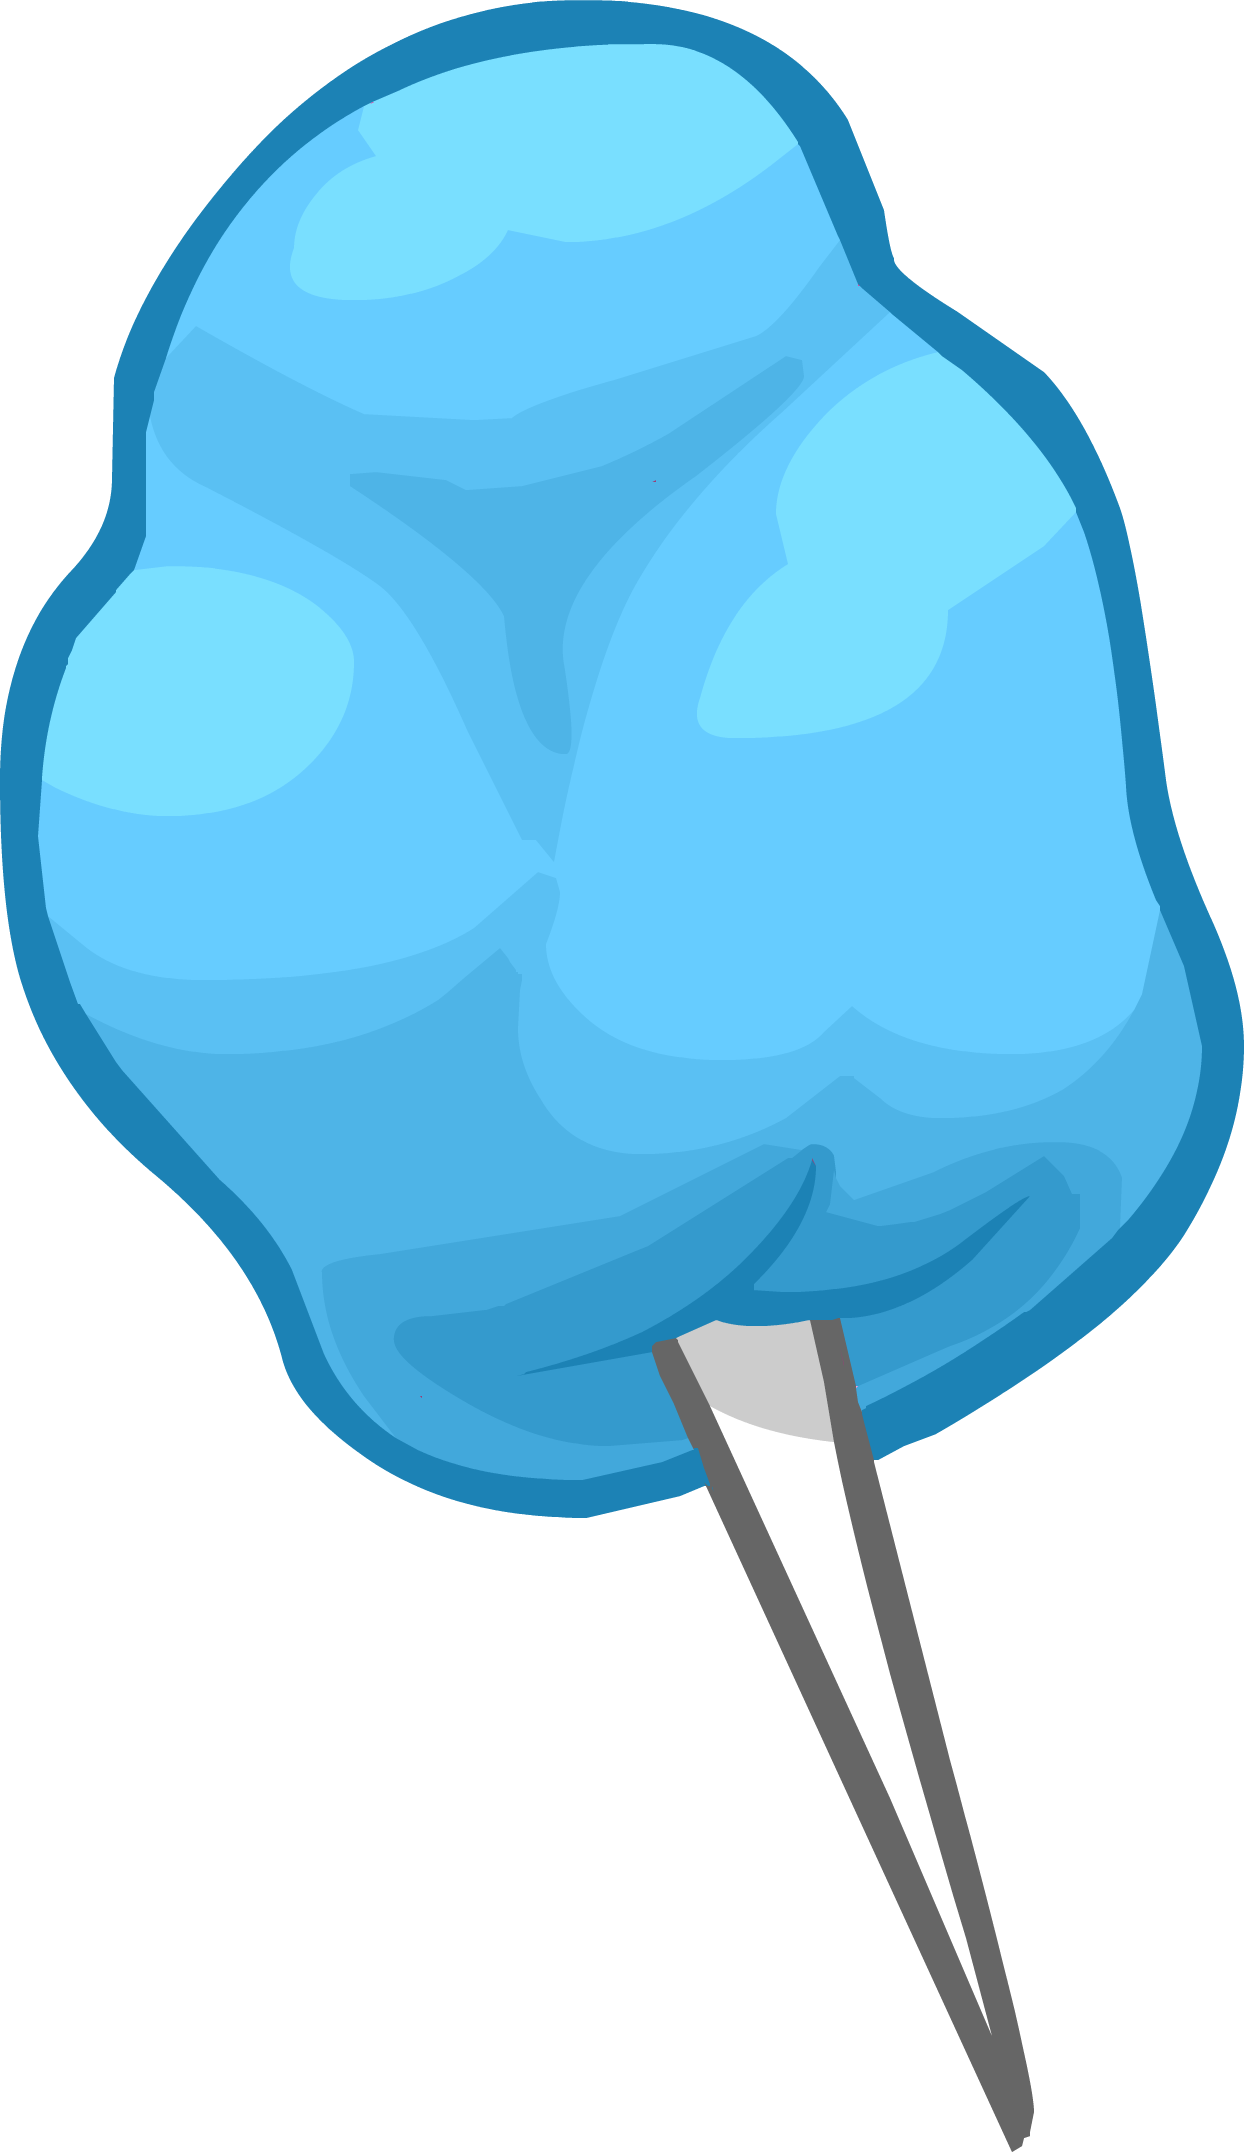 Squid clipart blue. Image cotton candy png